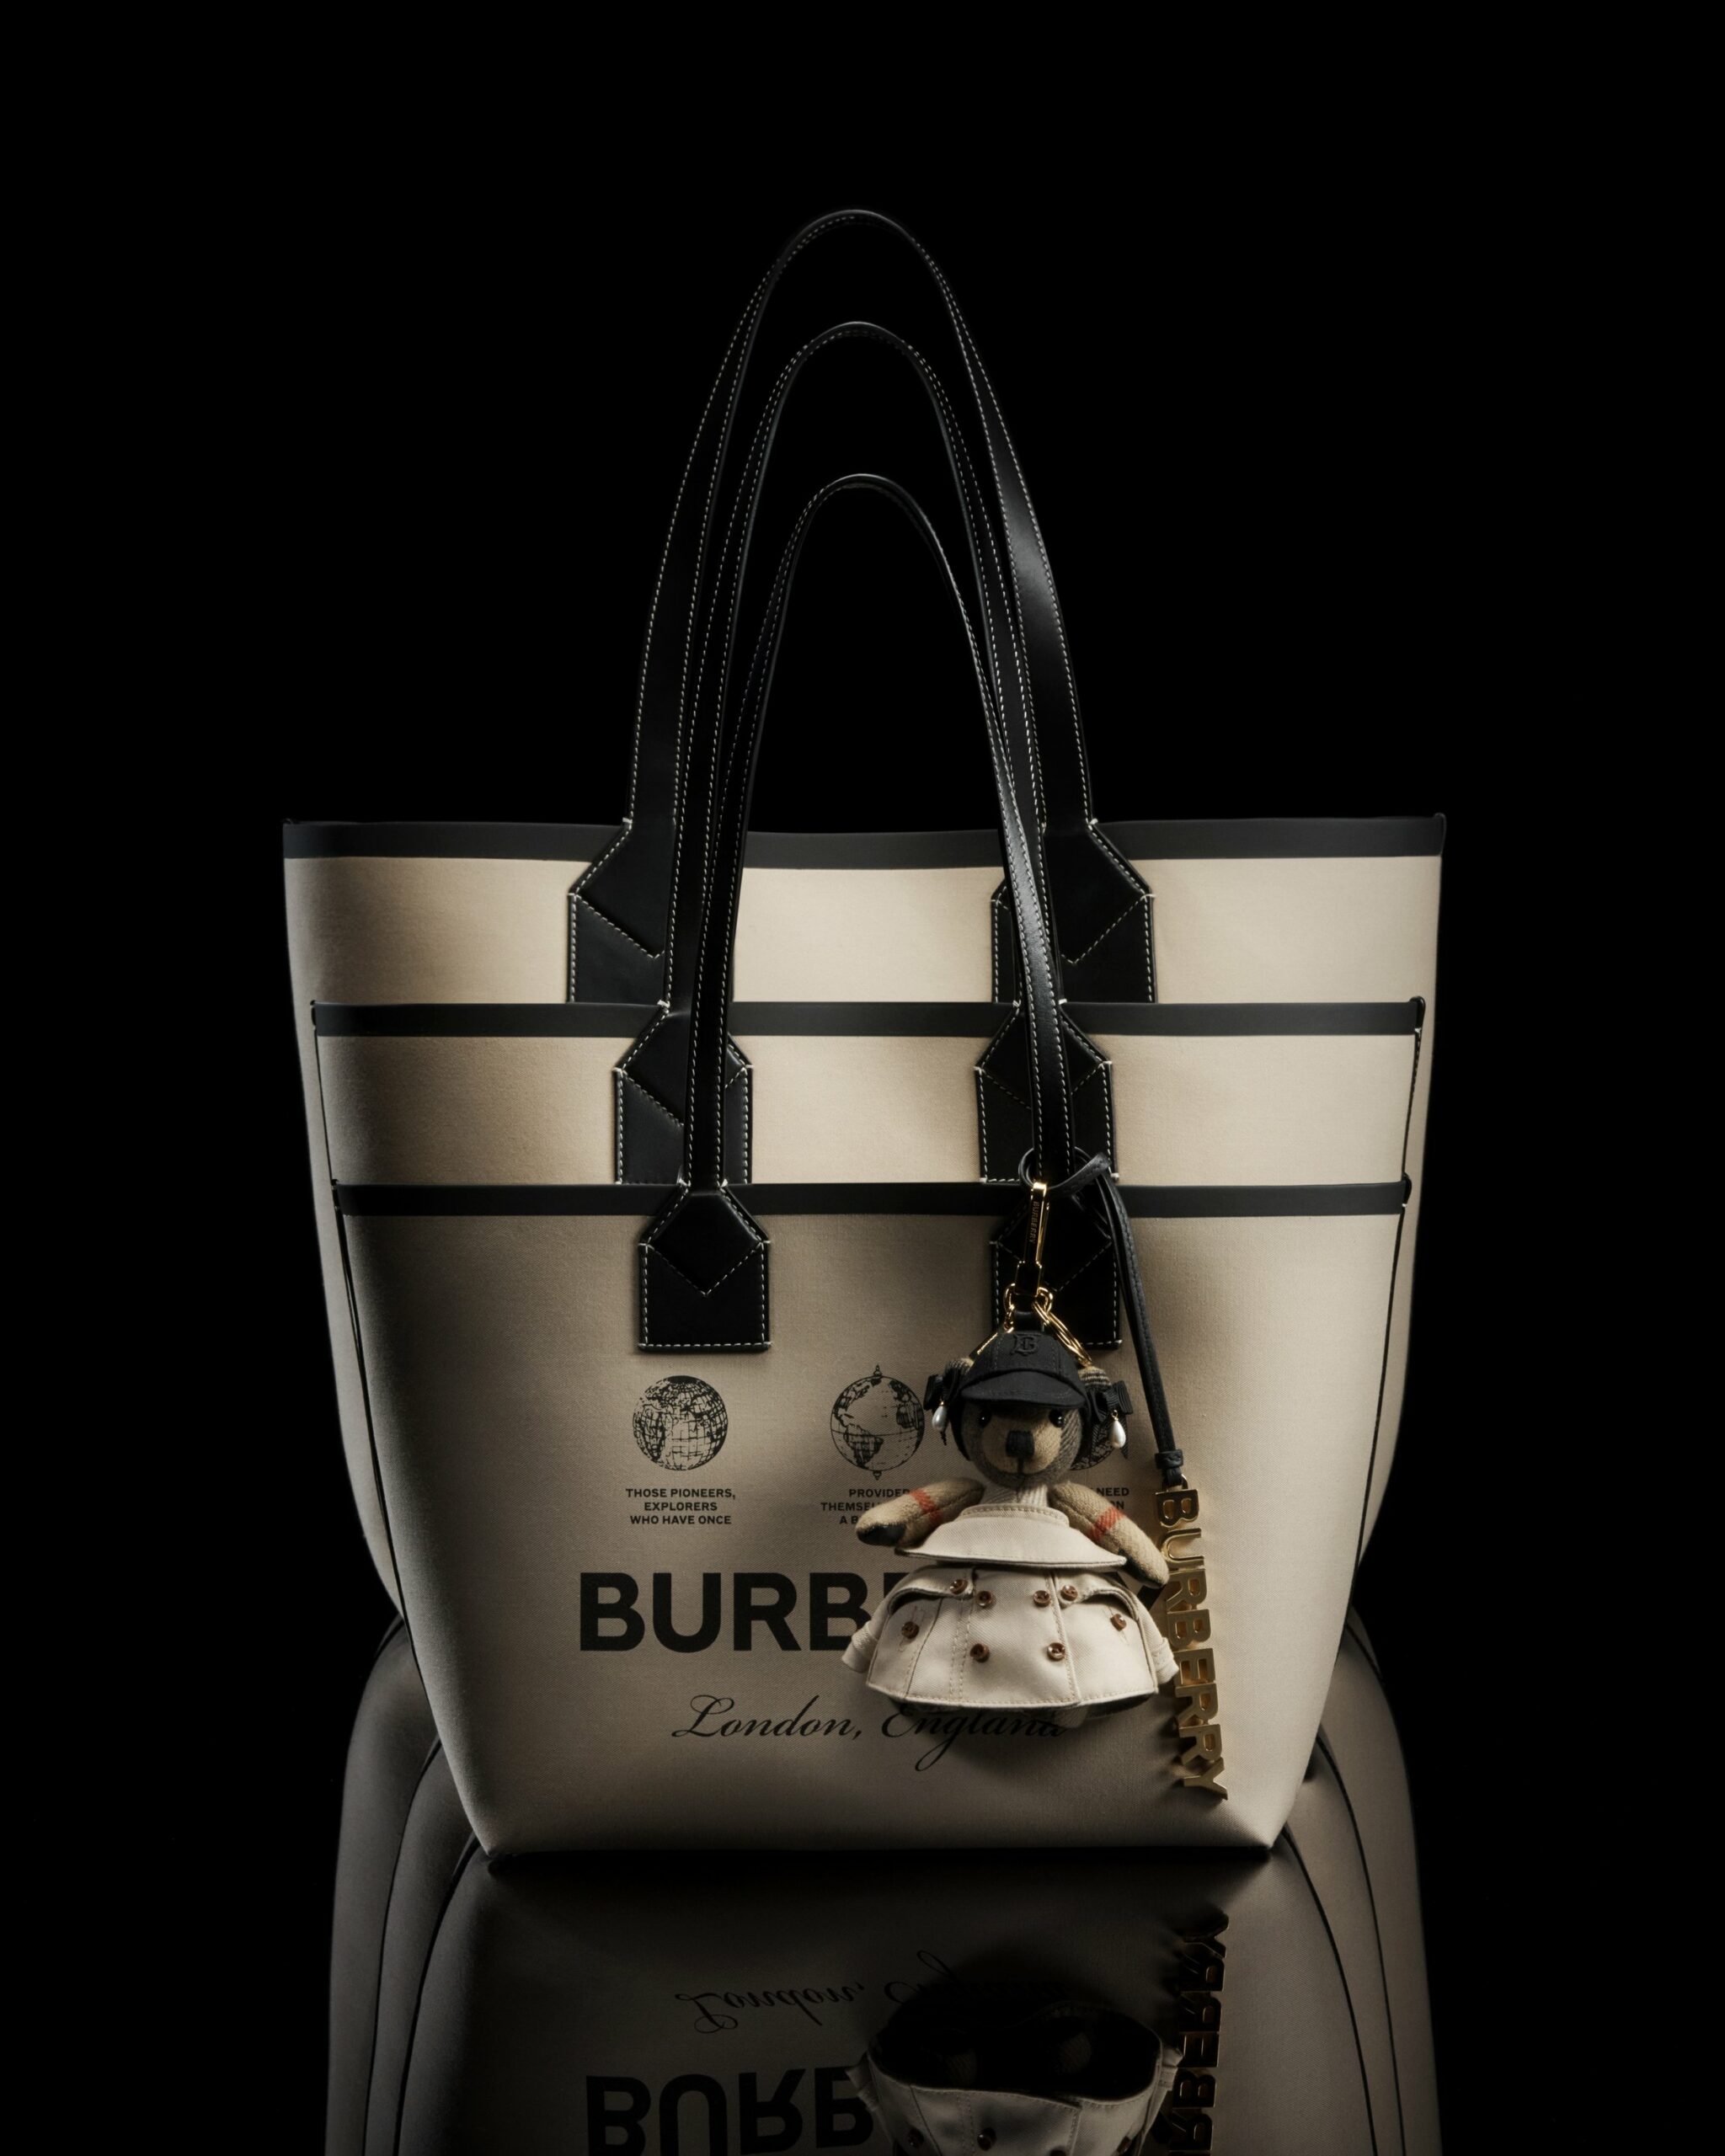 BURBERRY_2022_FESTIVE_GIFTING_CROPPED_4x5_29